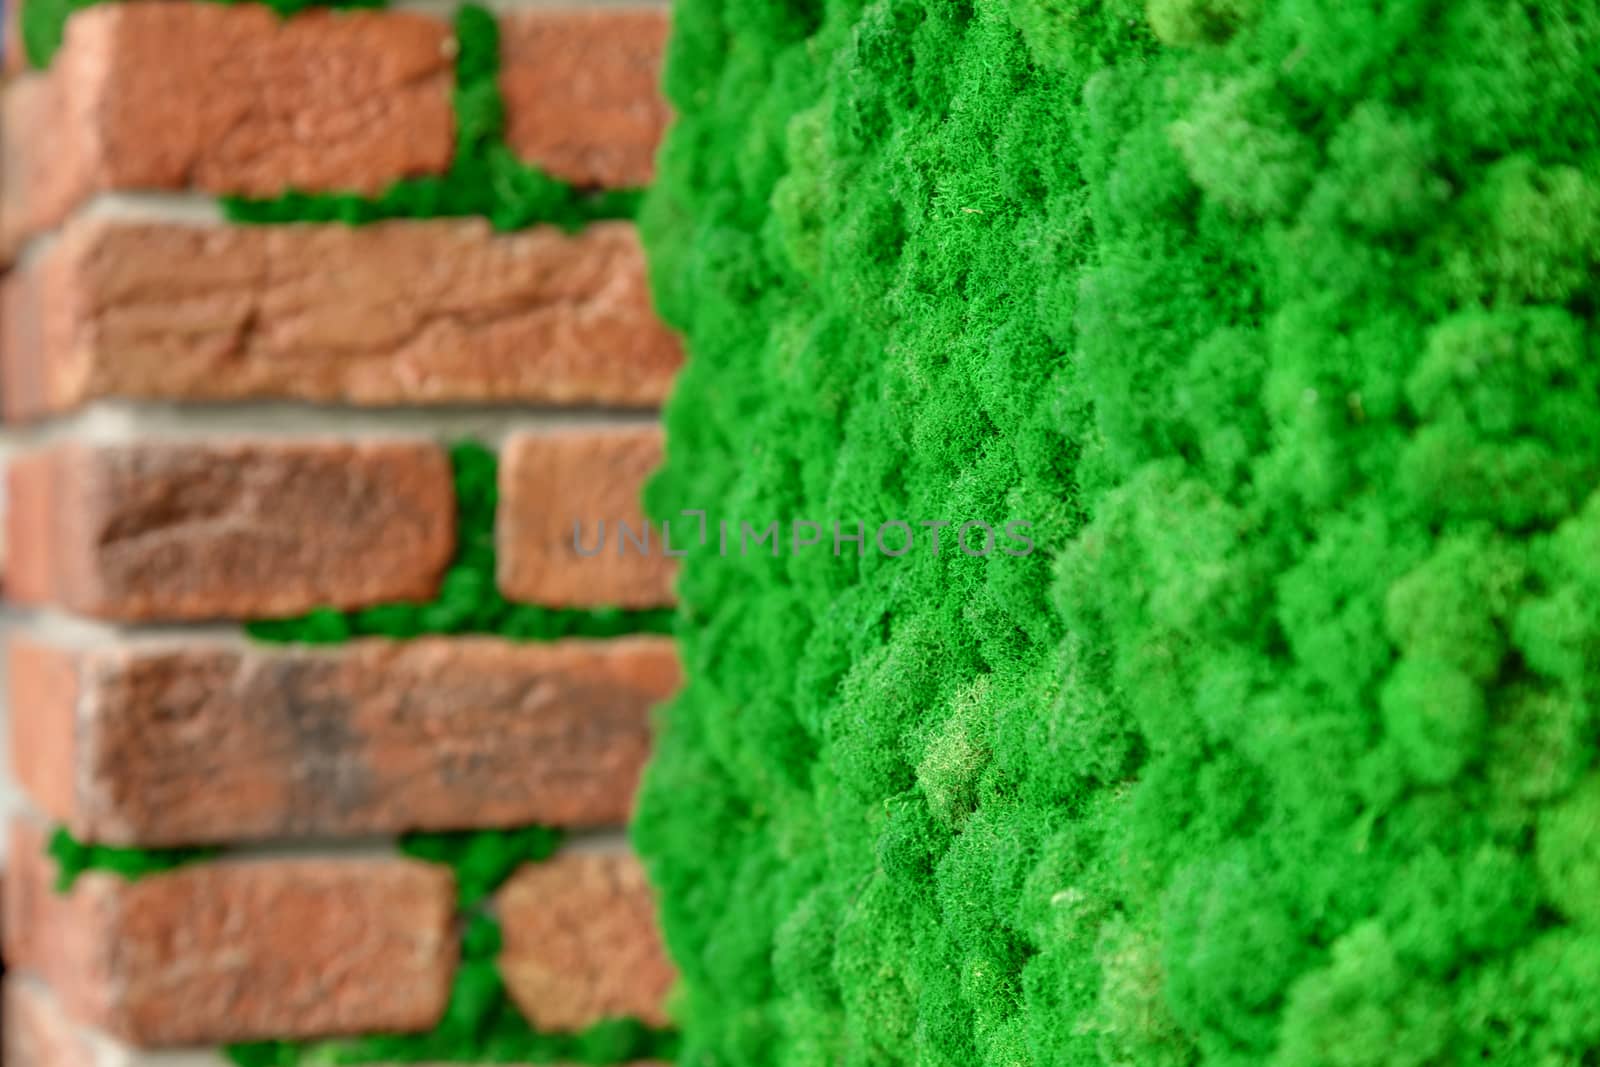 Brick wall with decorative green moss by sveter